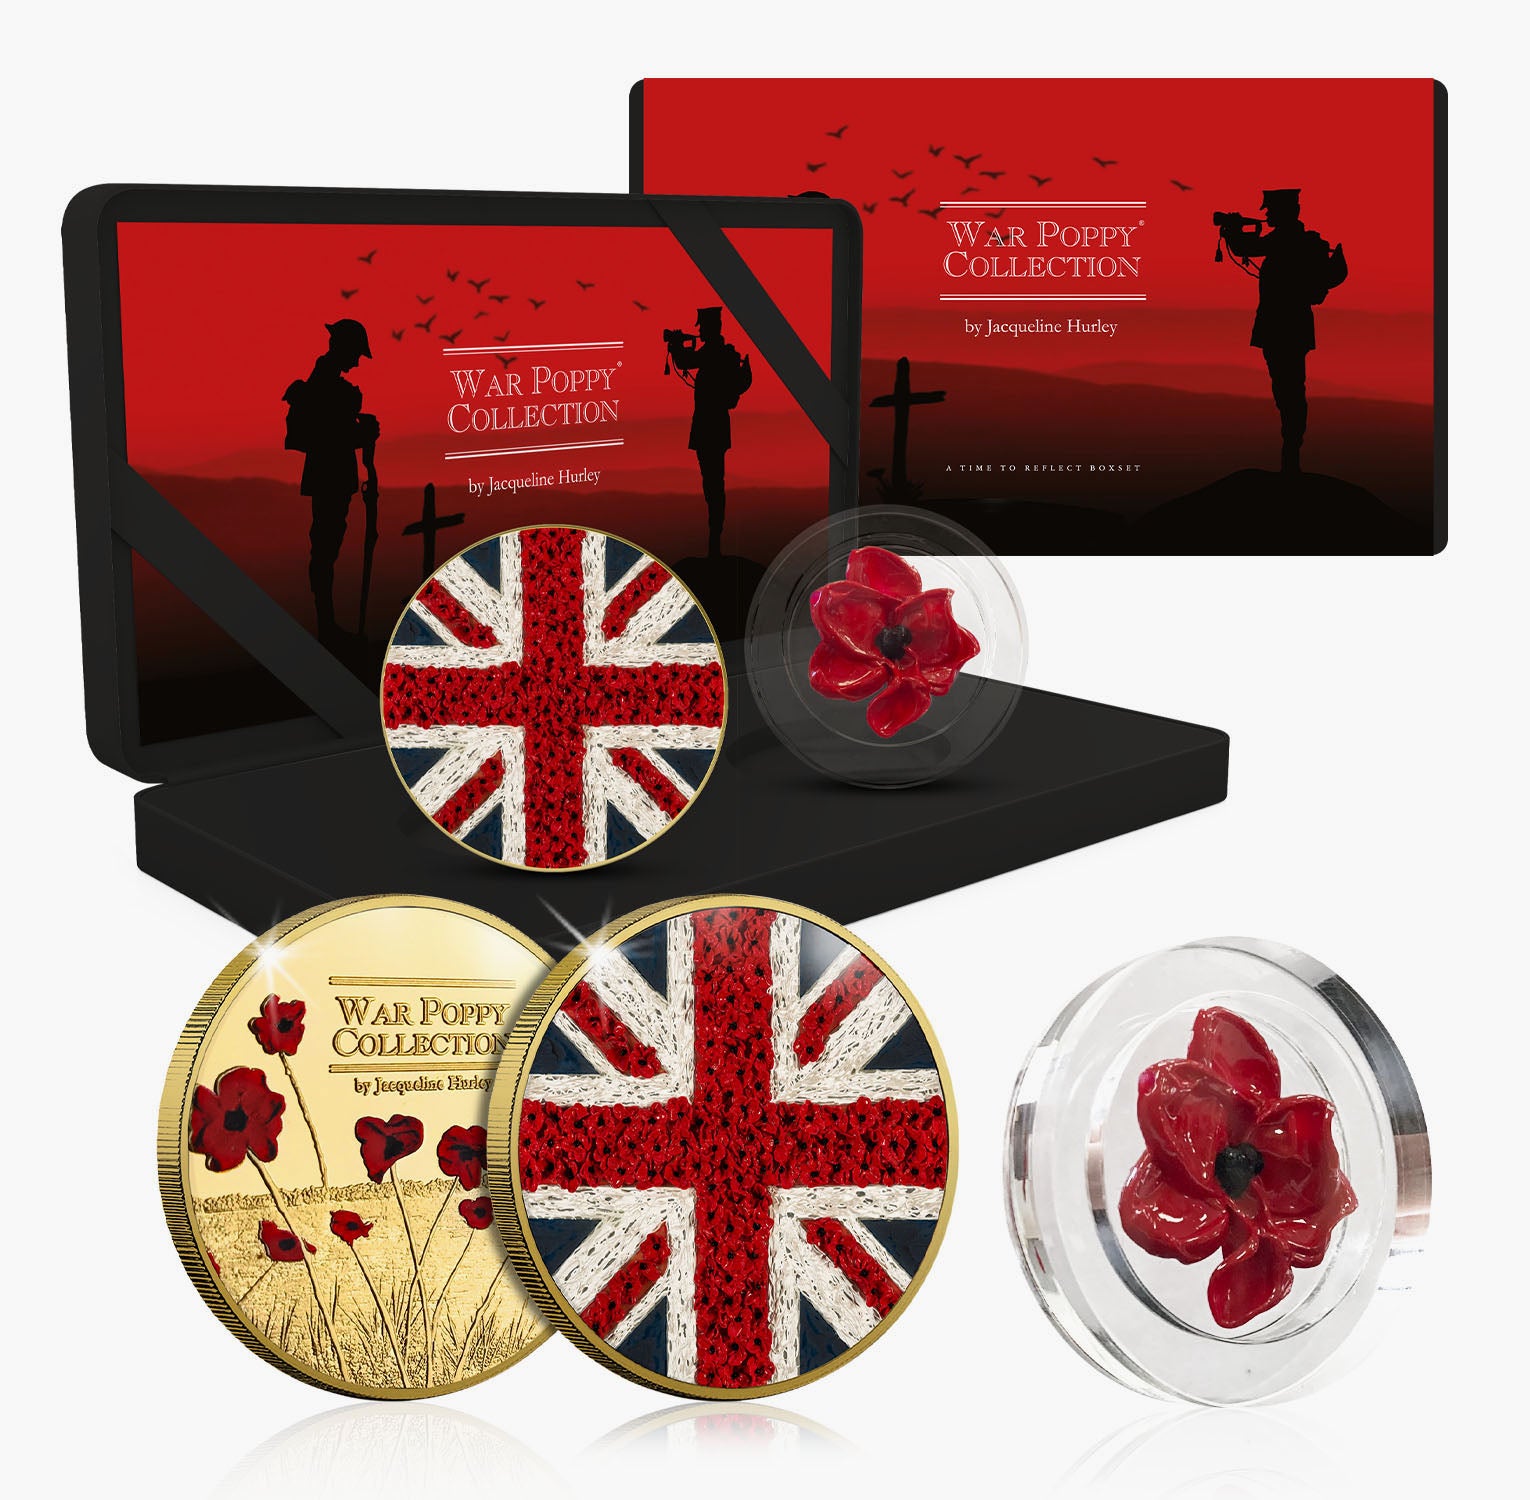 Le coffret Jacqueline Hurley War Poppy a Time to Reflect